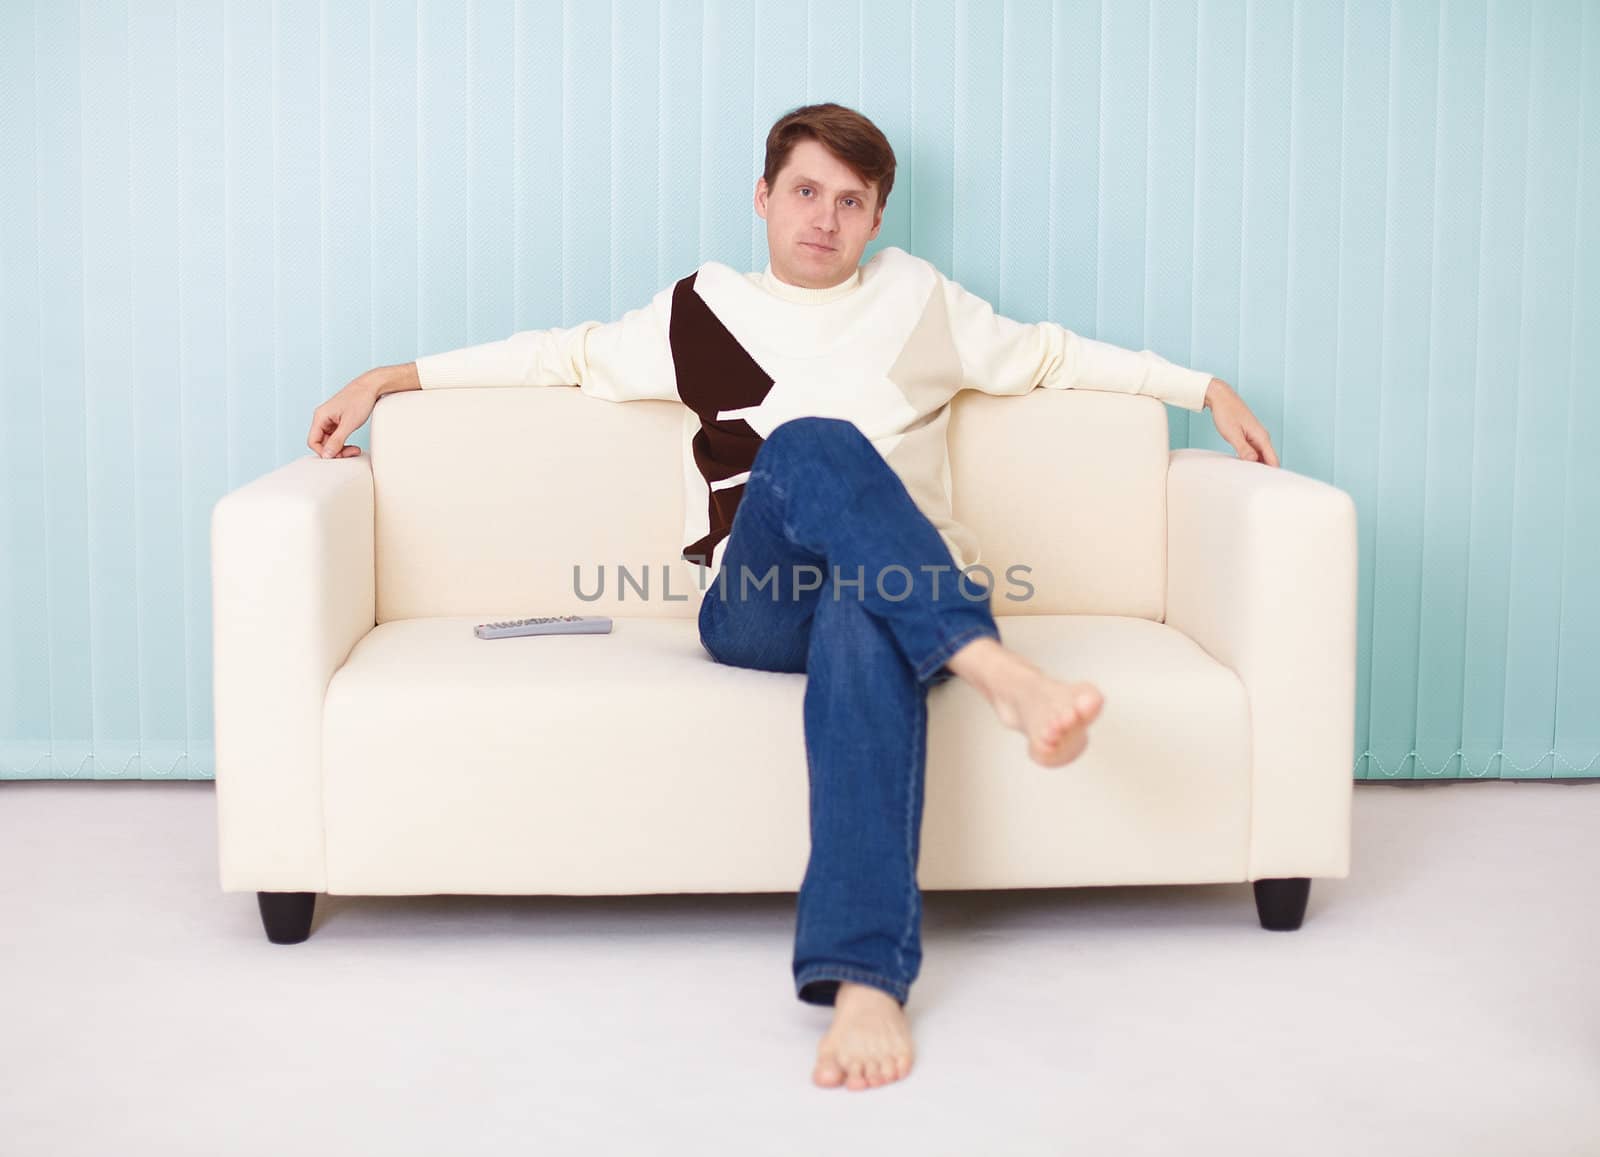 A young man sits comfortably on a soft sofa